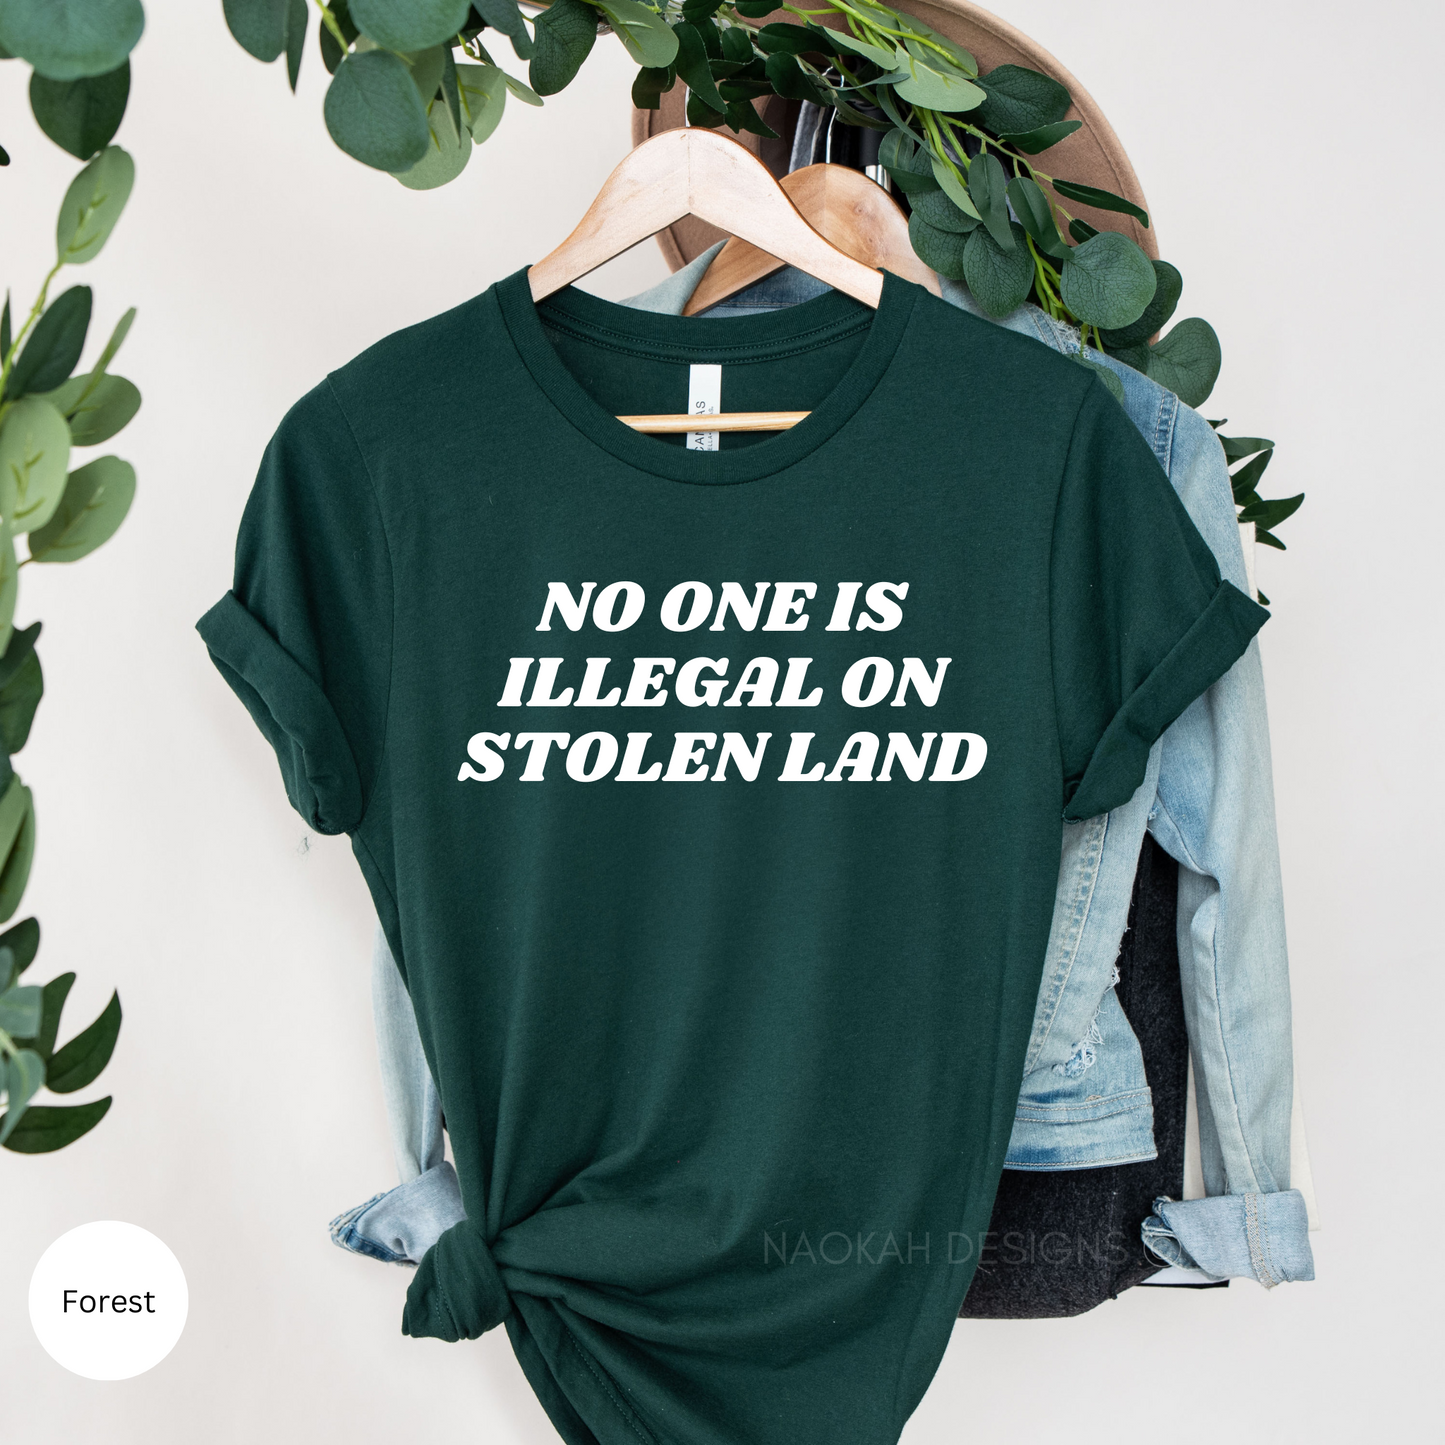 no one is illegal on stolen land shirt, native american shirt, pro immigrant tee, no one is illegal shirt, antiracism t-shirt, native shirt, immigrant shirt, latino shirt, no human is illegal shirt, anti trump shirt, immigration t-shirt, pro immigrant tee, human rights top, abolish ice, social justice activism gift